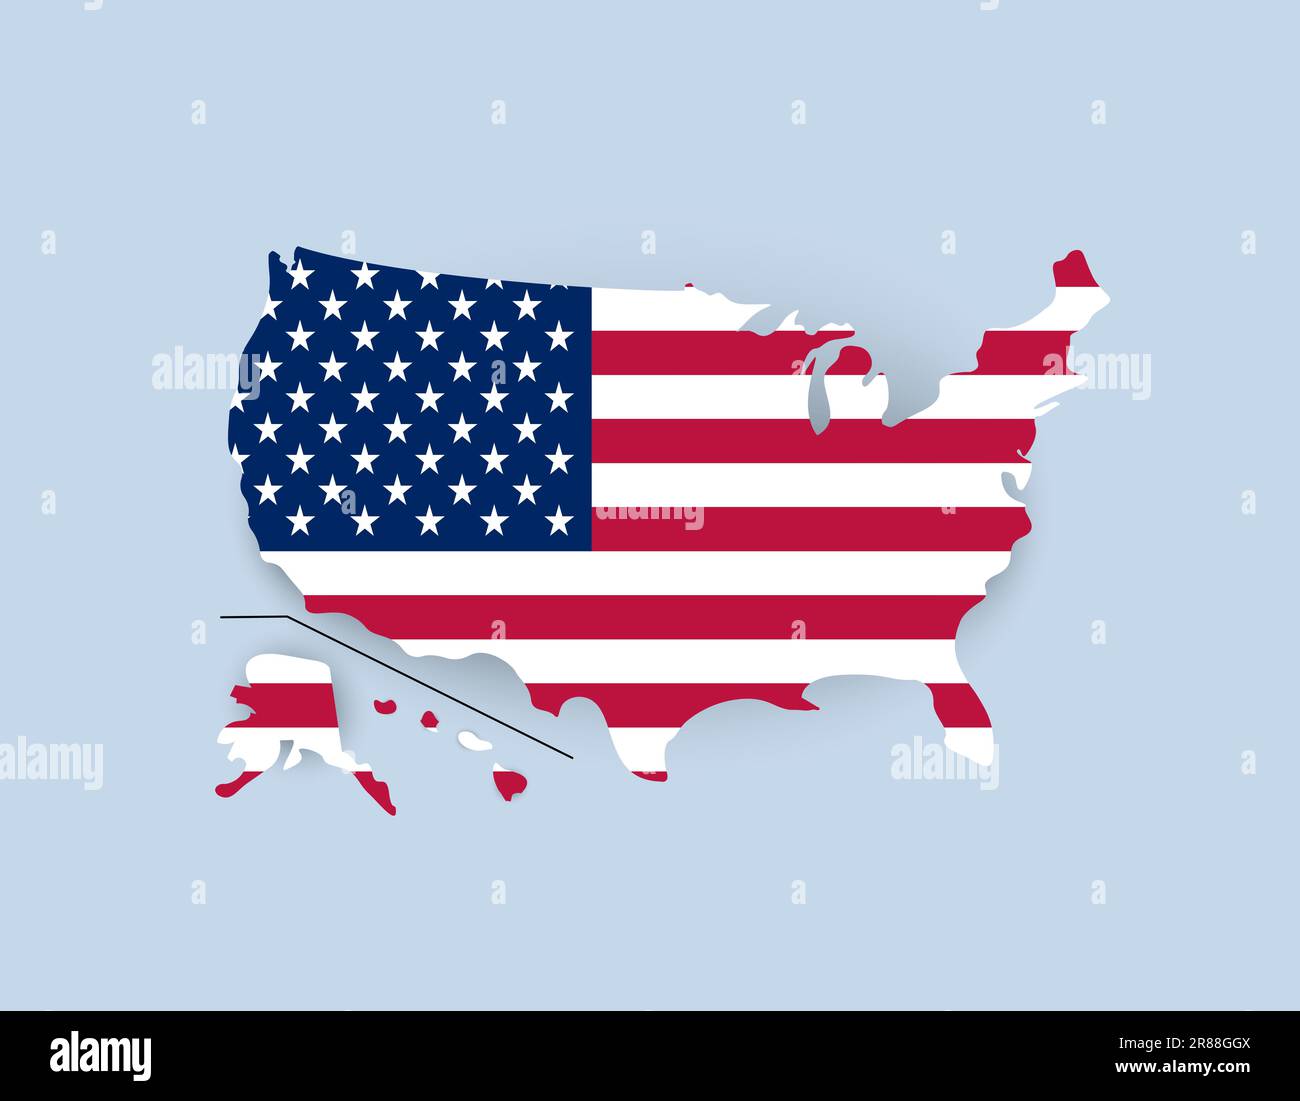 USA map in United States flag colors. Vector flat illustration. Abstract geographic borders of America country with Alaska and Hawaii Stock Vector